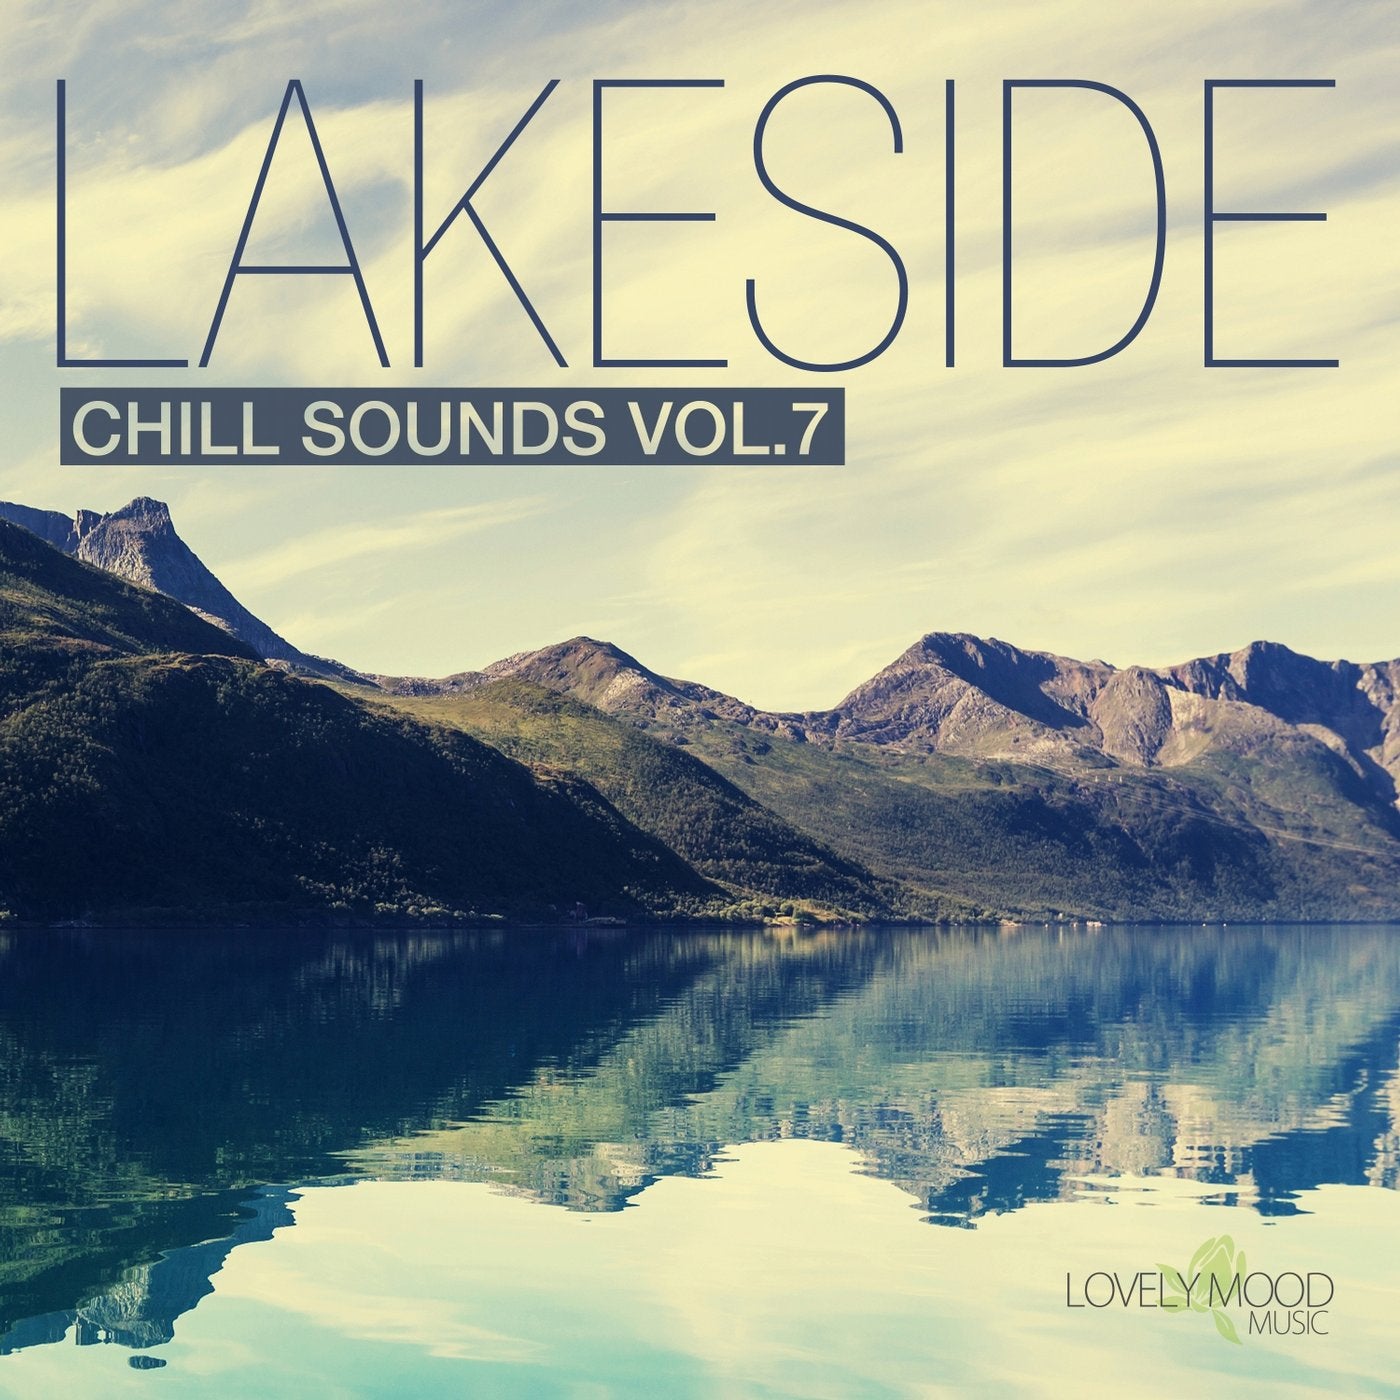 Lakeside Chill Sounds Vol. 7